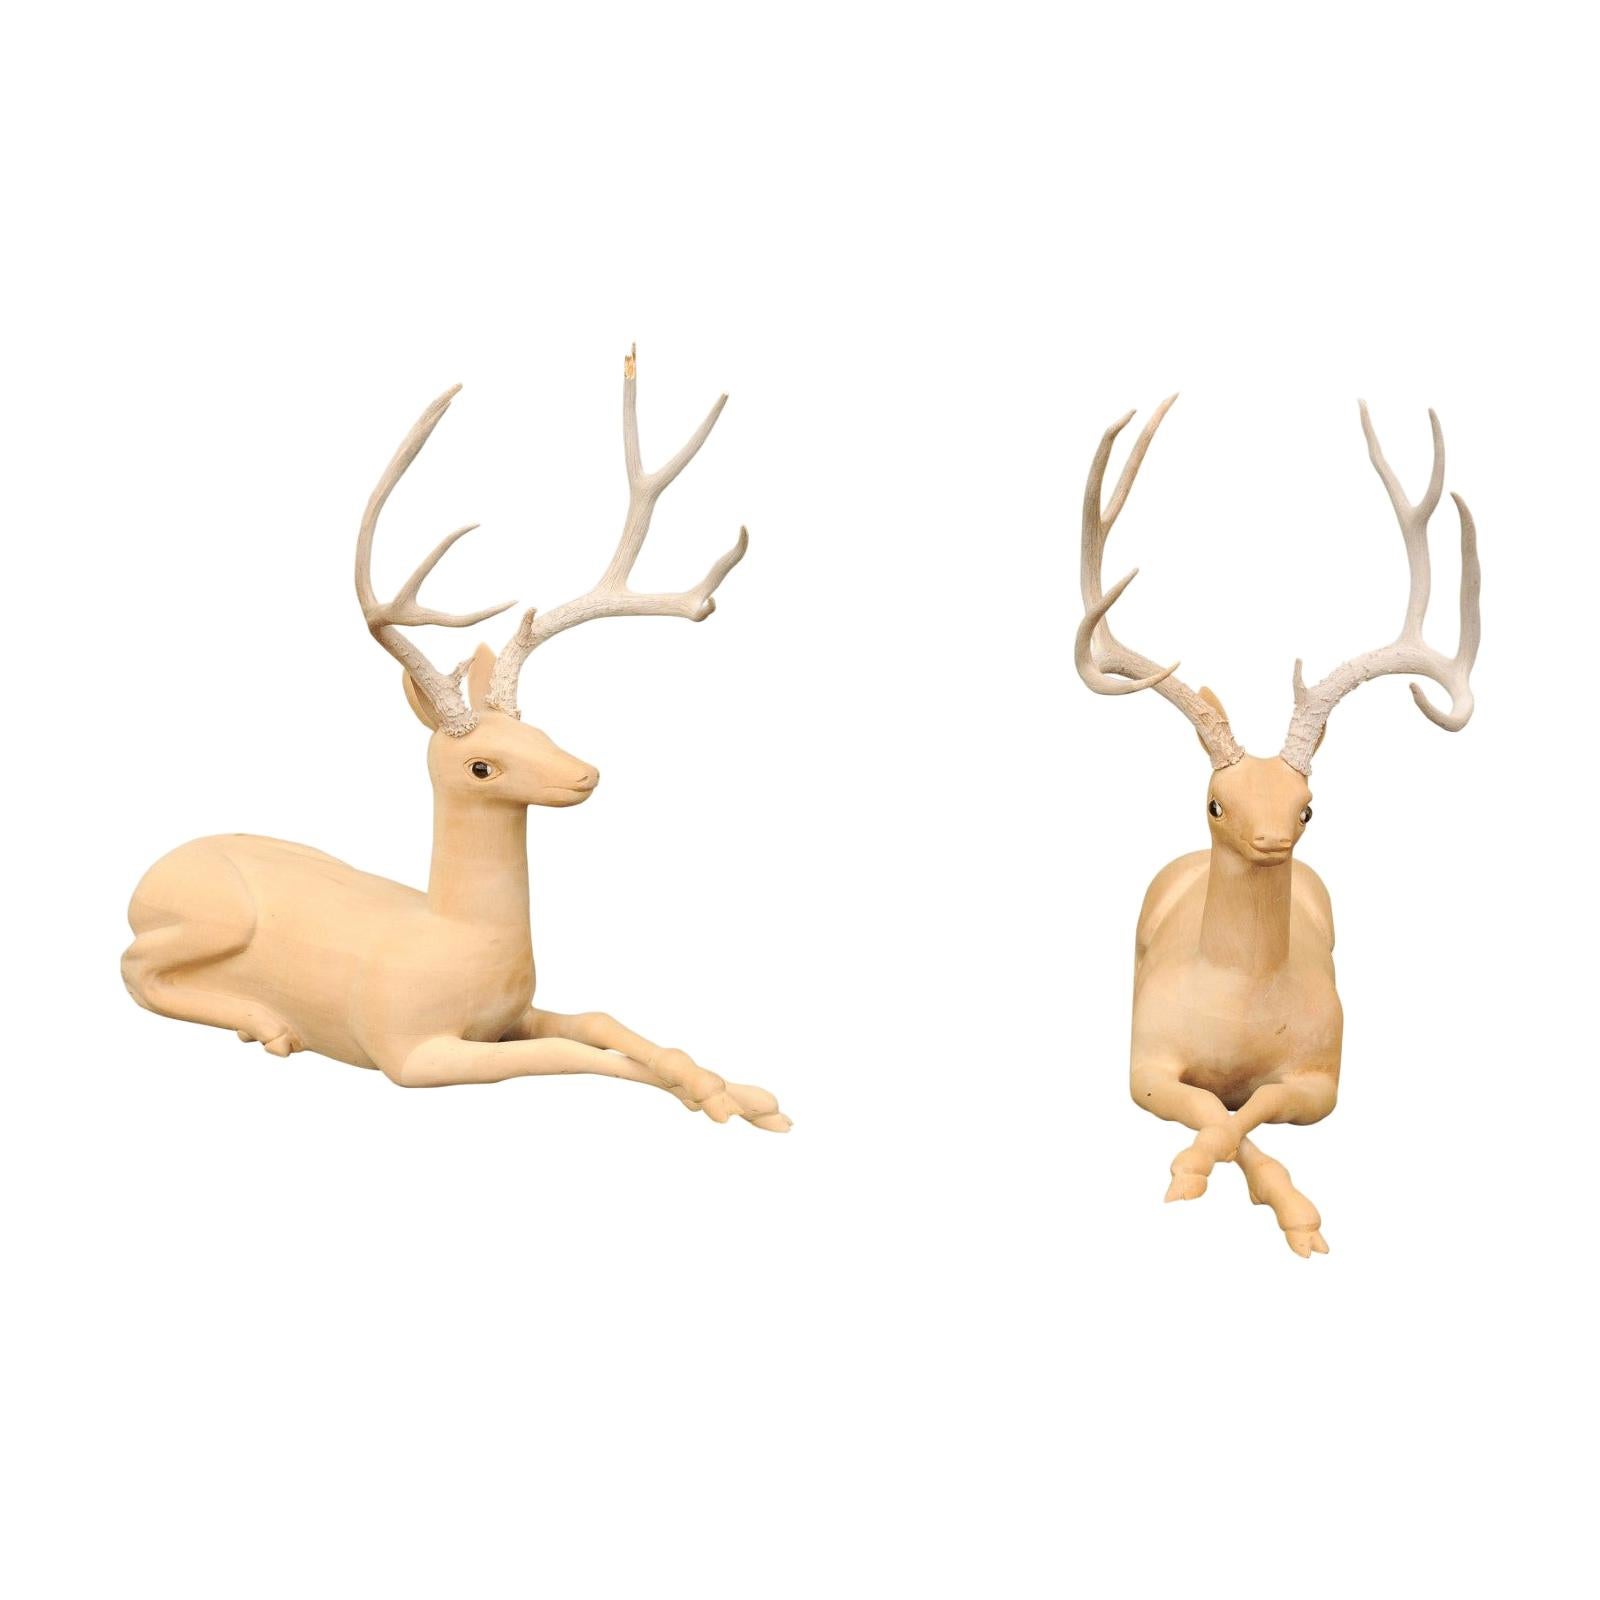 Pair of Italian Vintage Midcentury Carved Wooden Stag Sculptures with Antlers For Sale